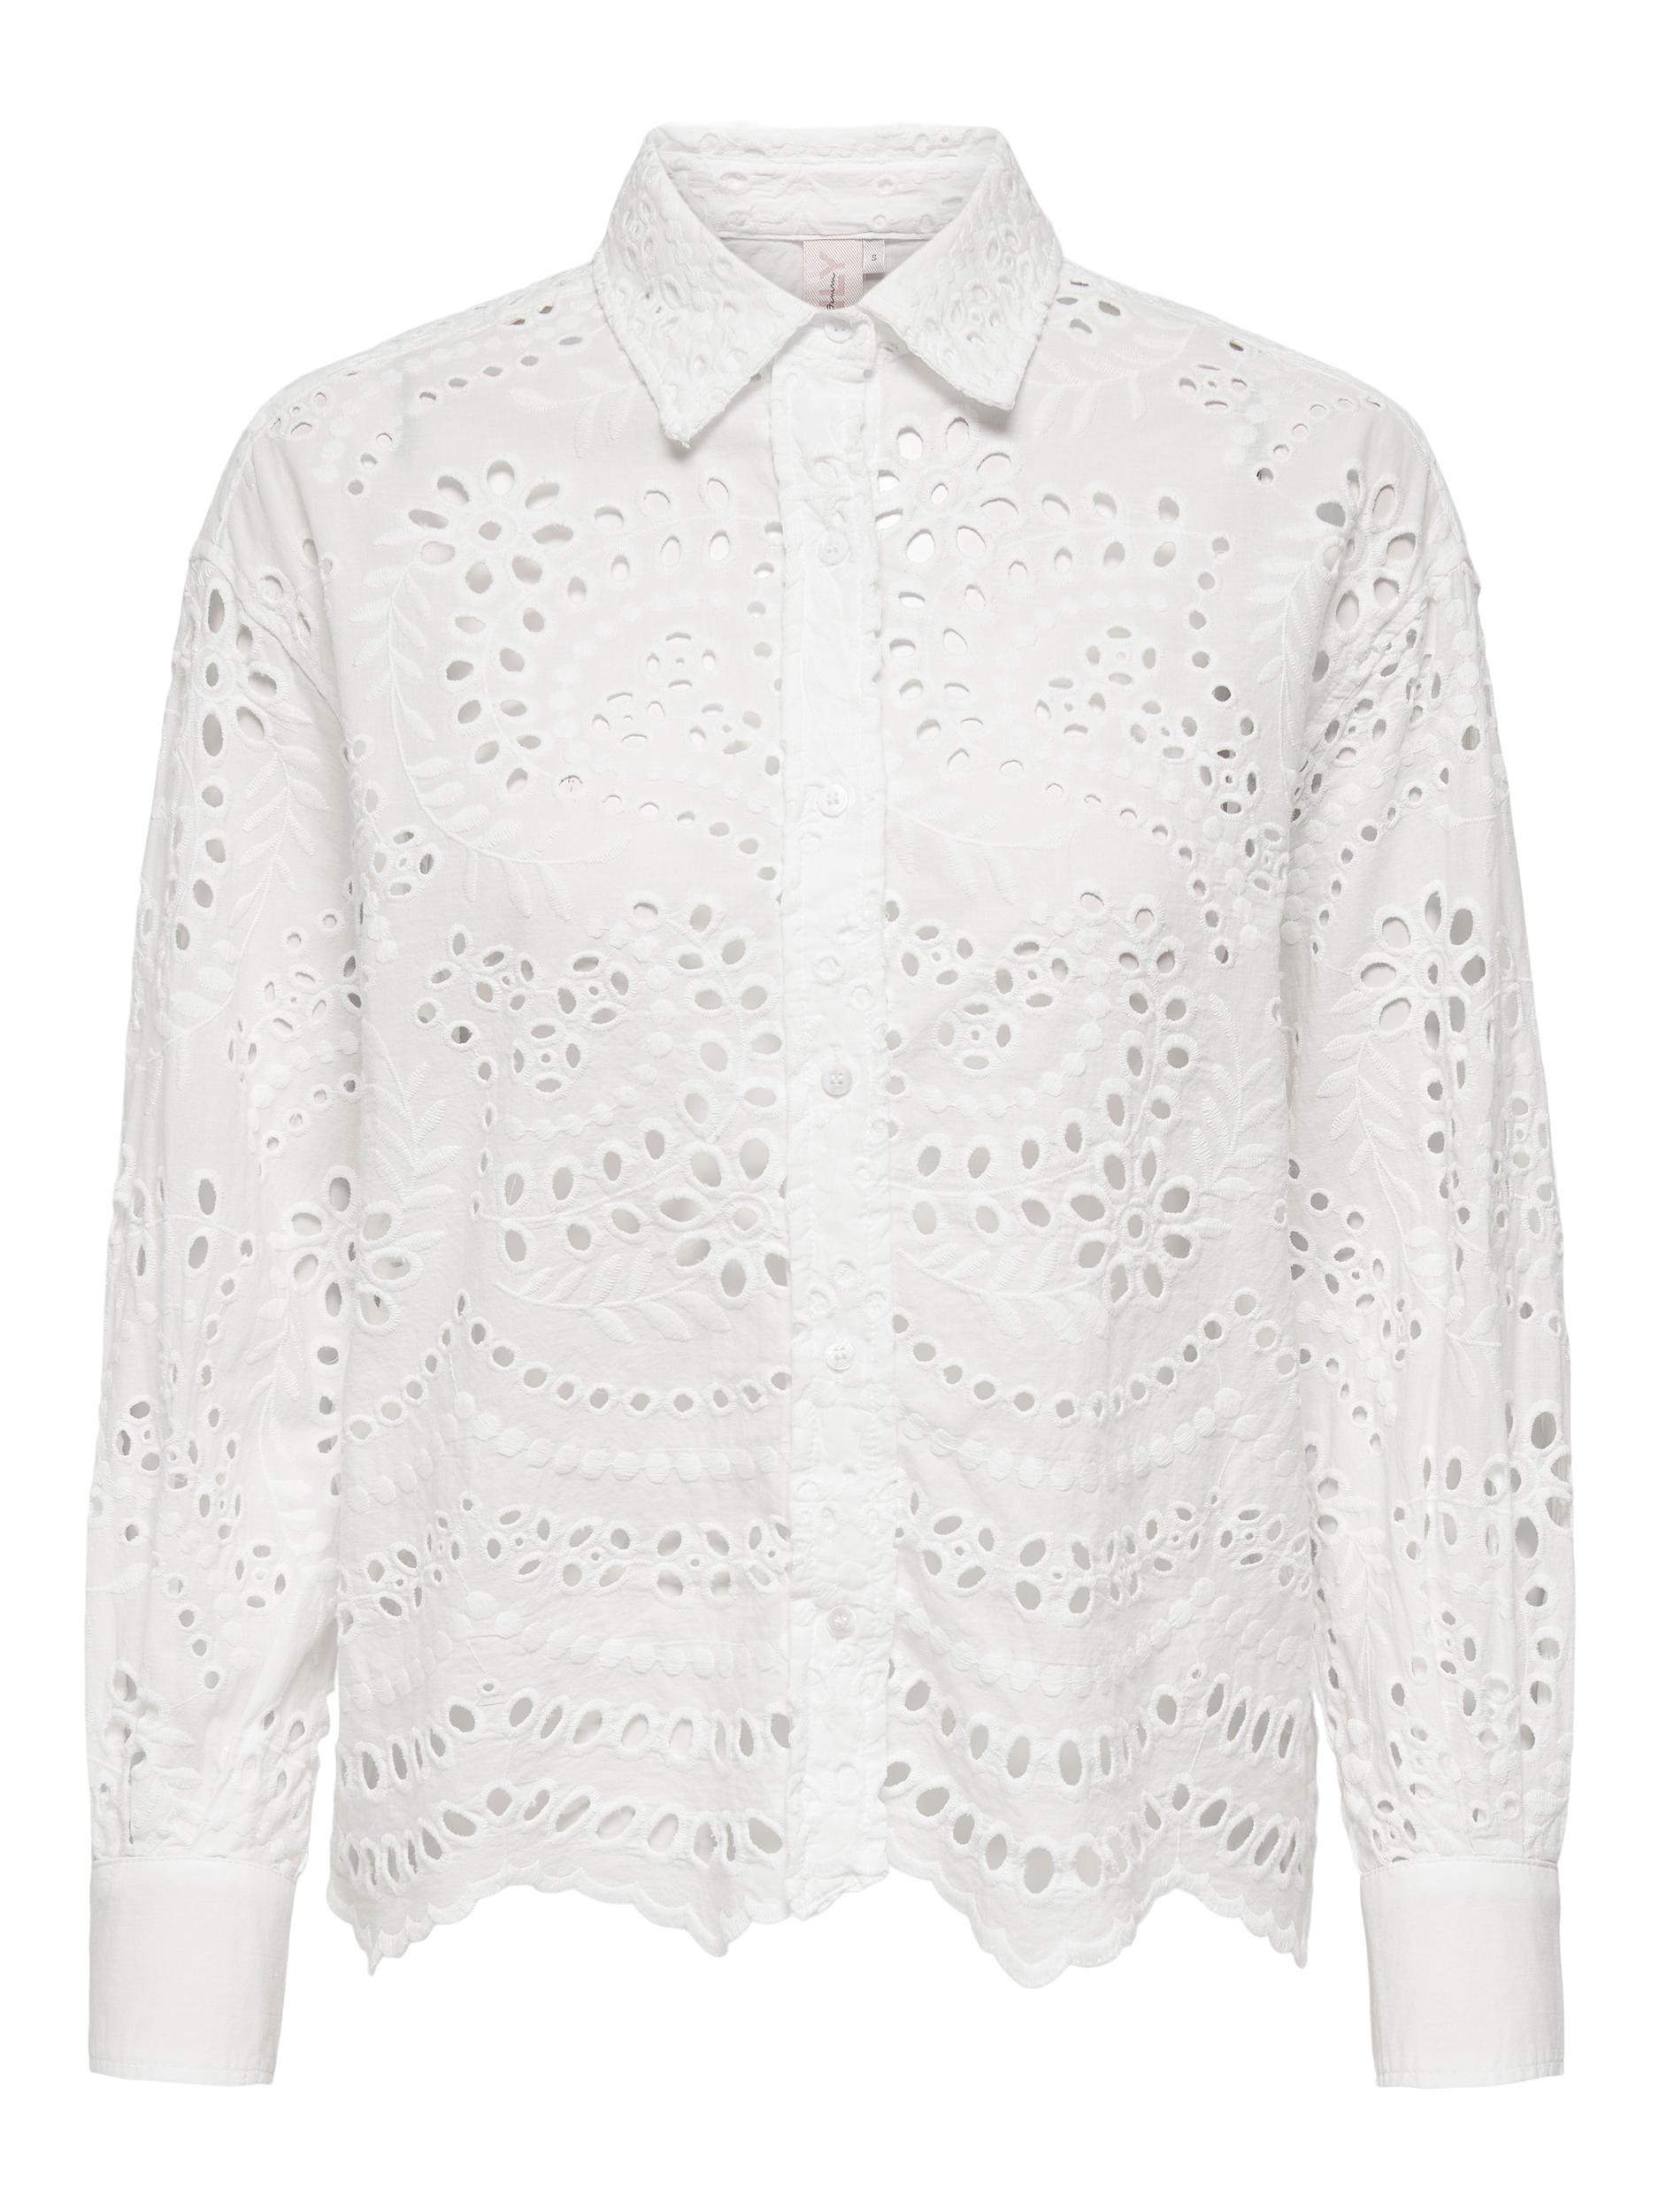 Only - Camicia boxy fit in pizzo, Bianco, large image number 0